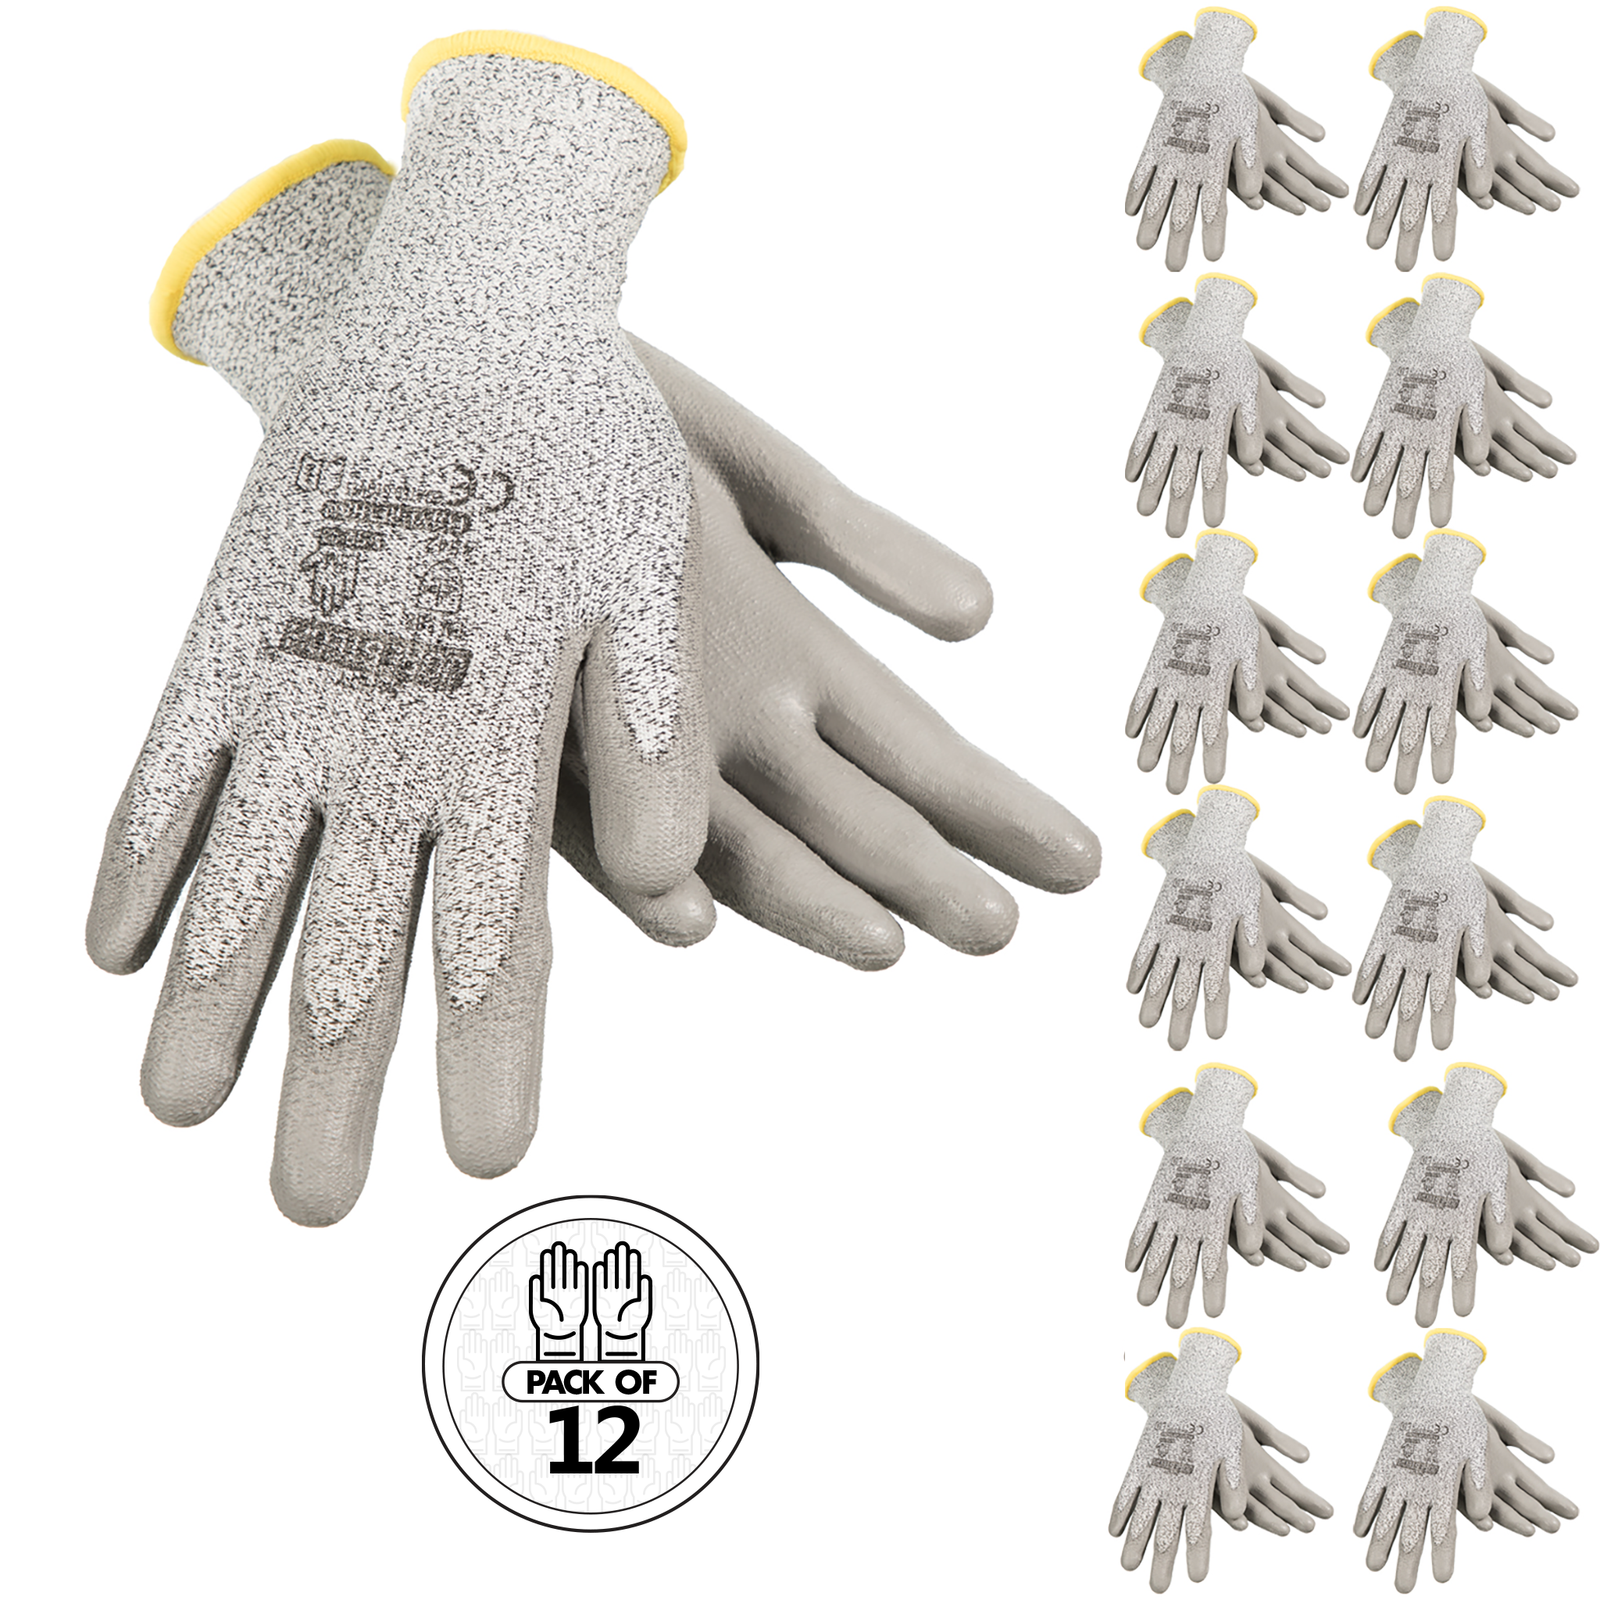 12 pack of cut resistant safety work gloves with polyurethane dipped palms